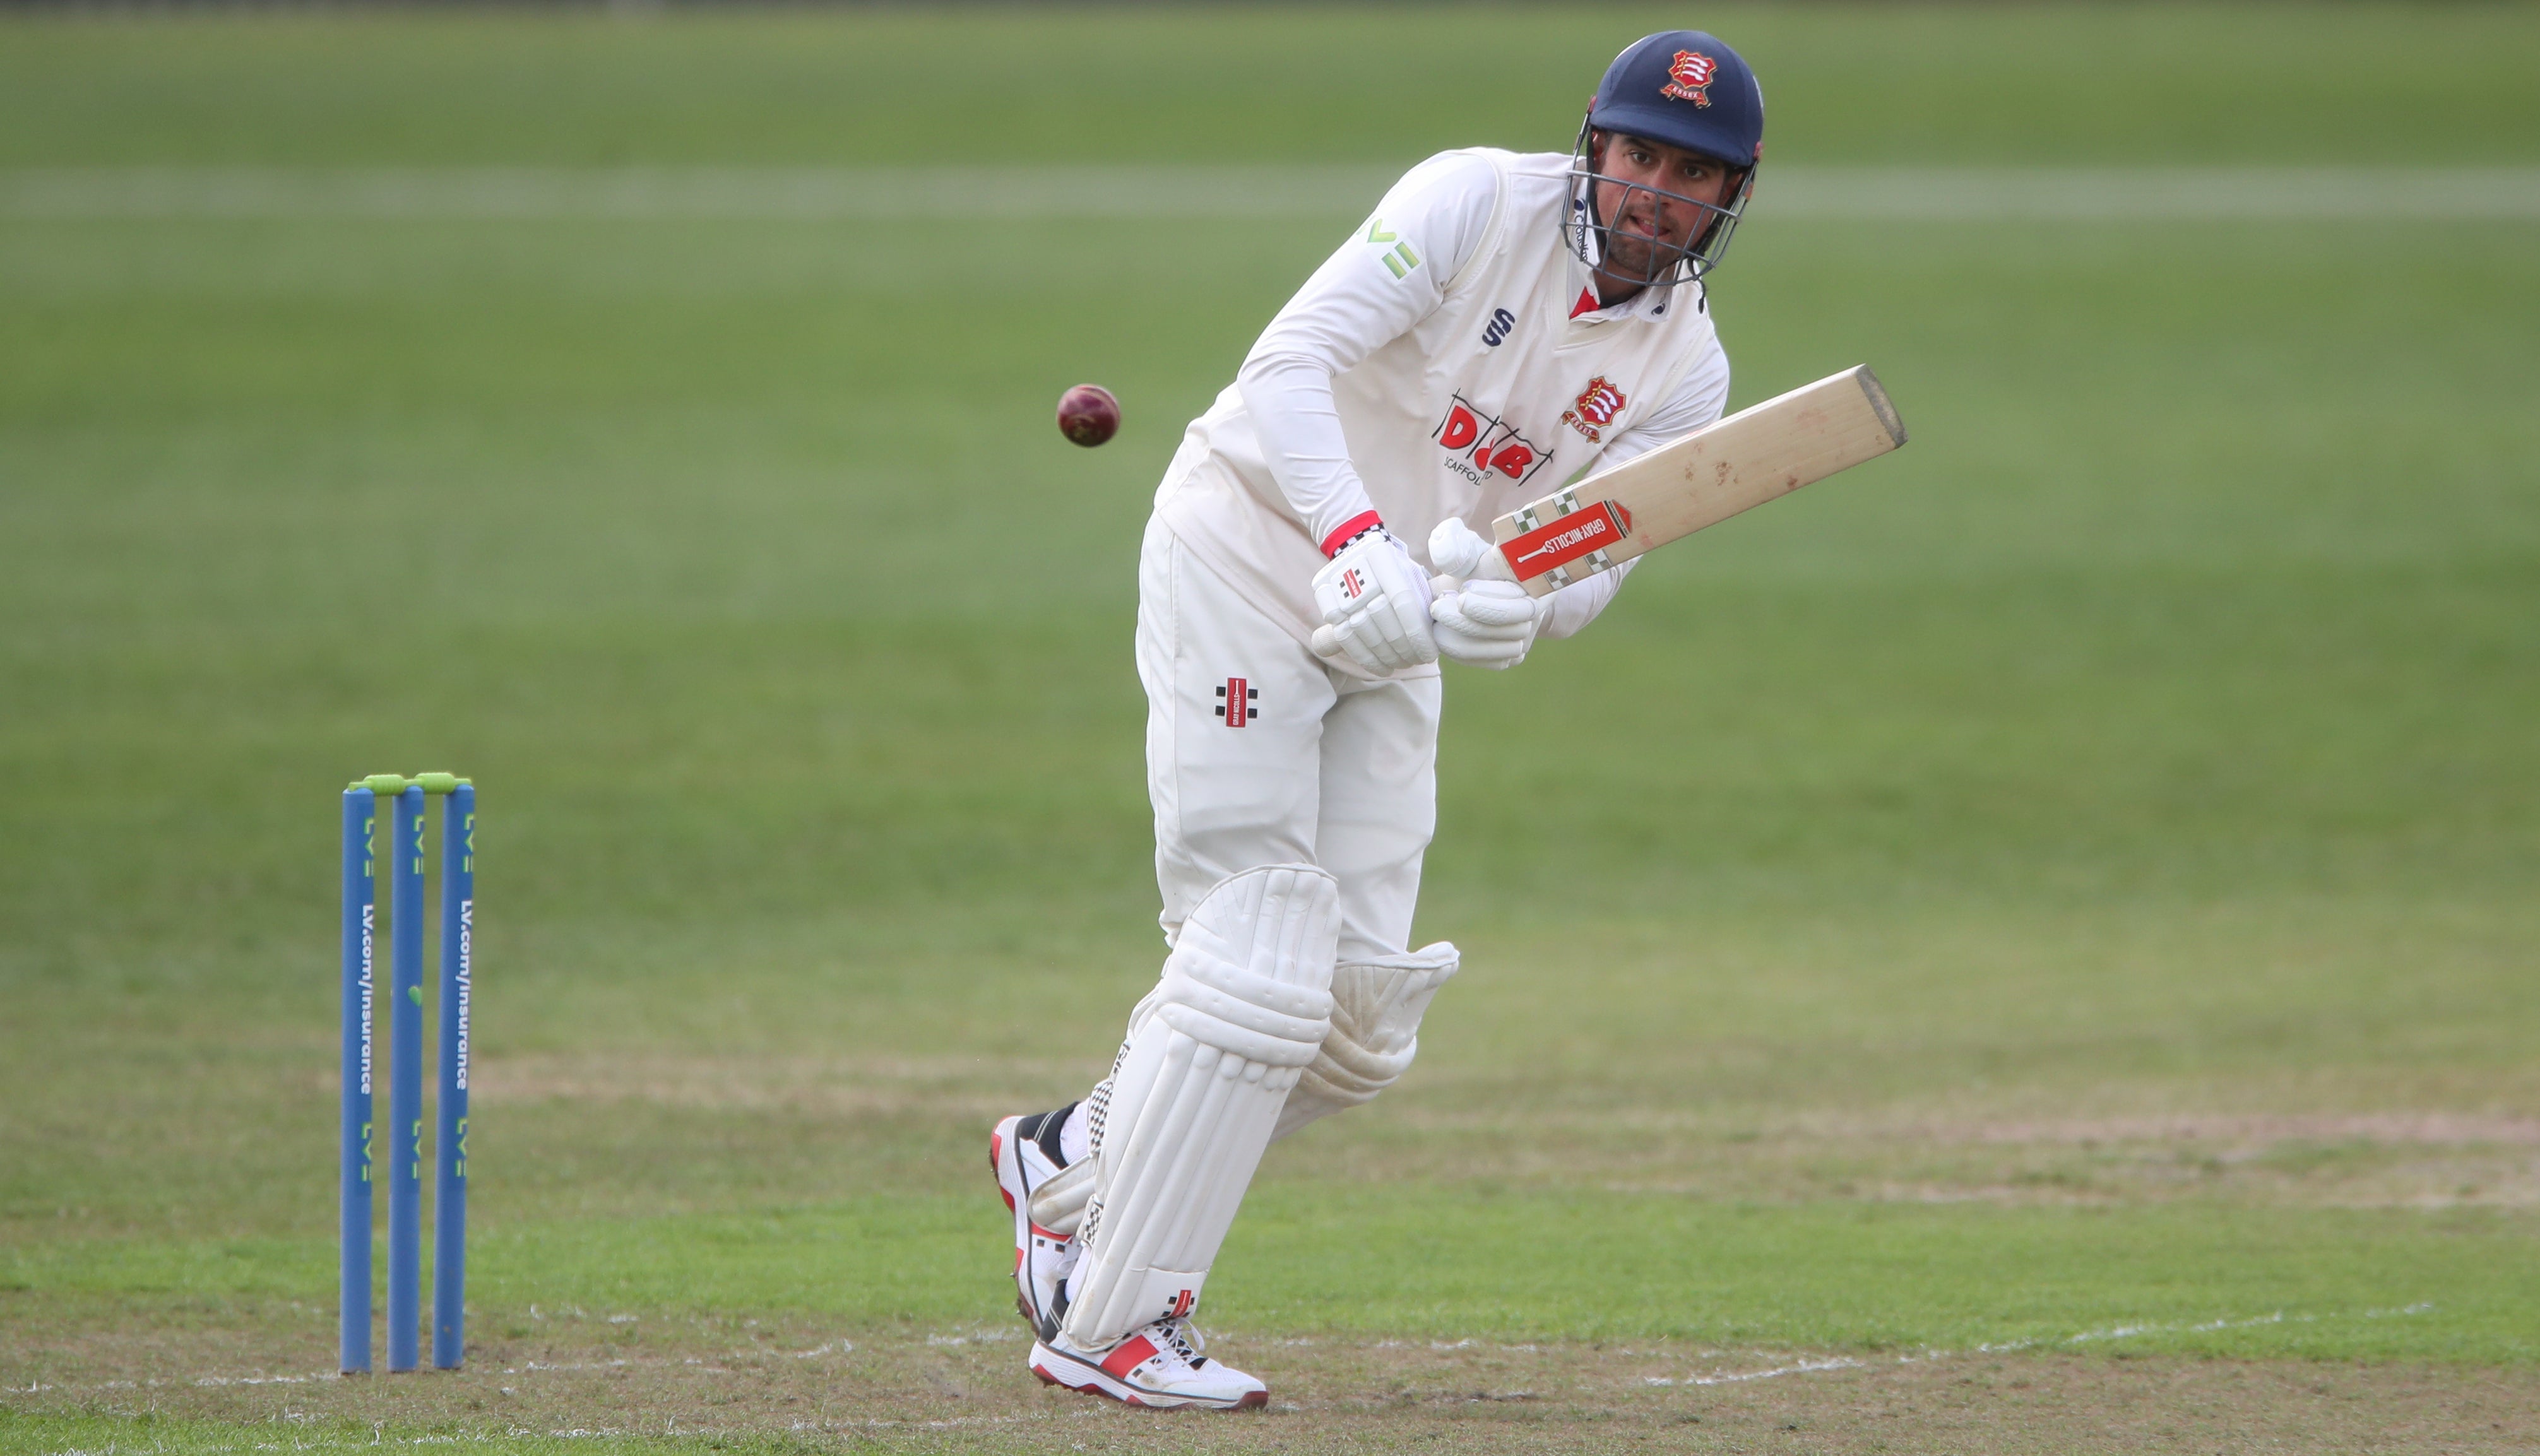 Sir Alastair Cook hit a century for Essex on day one of the new LV= Insurance County Championship (Nick Potts/PA)